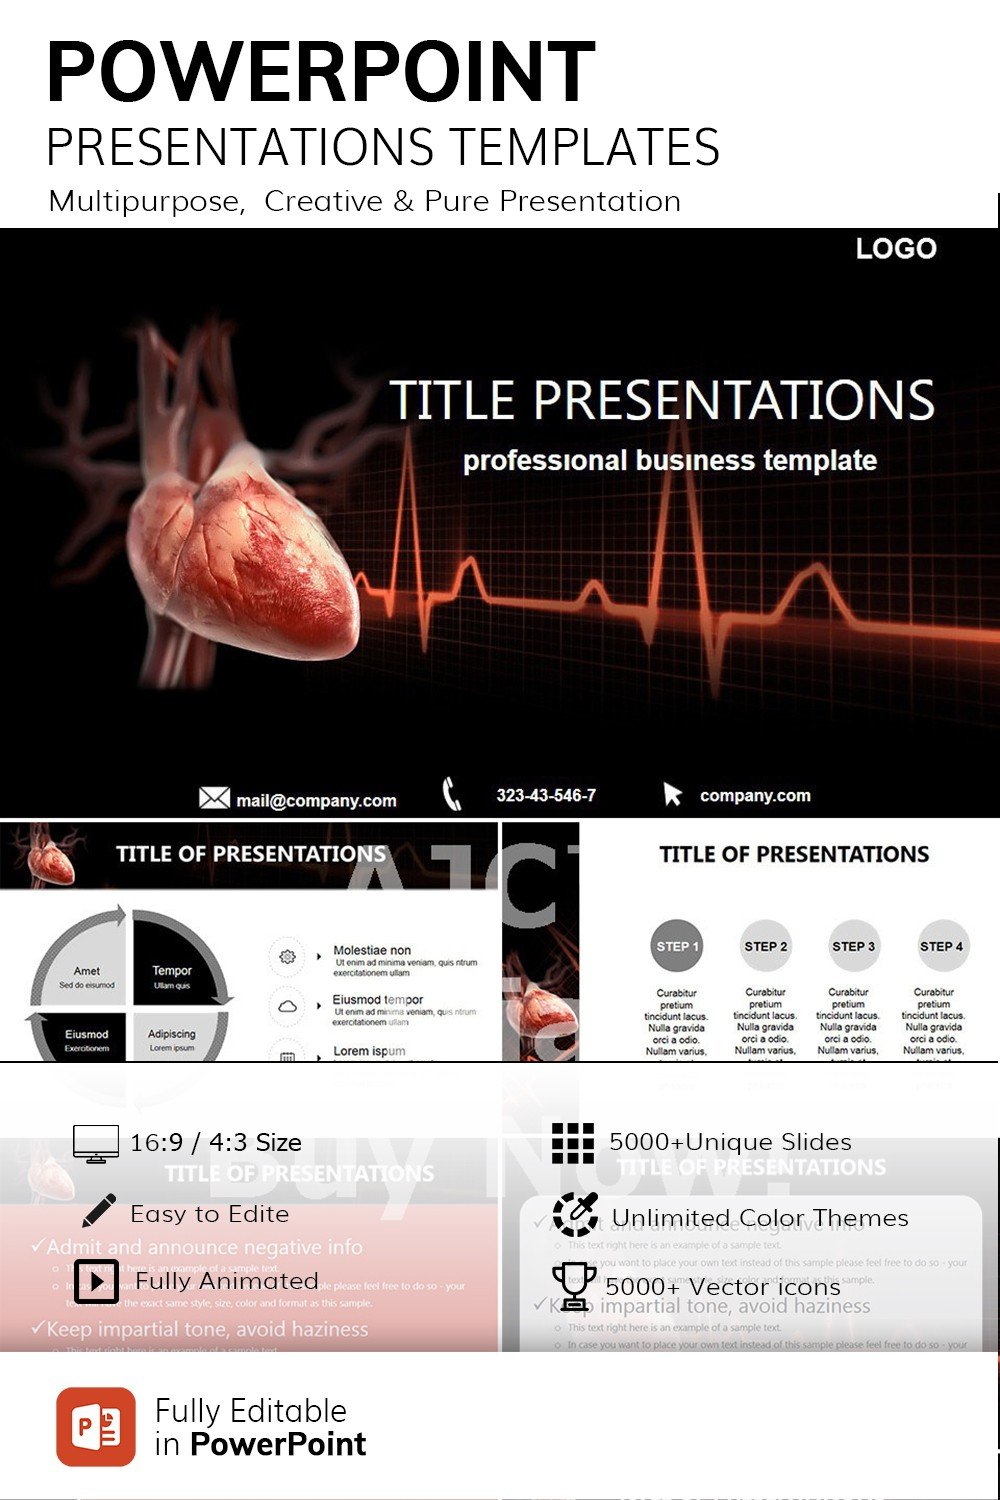 cardiology-heart-disease-powerpoint-template-download-now